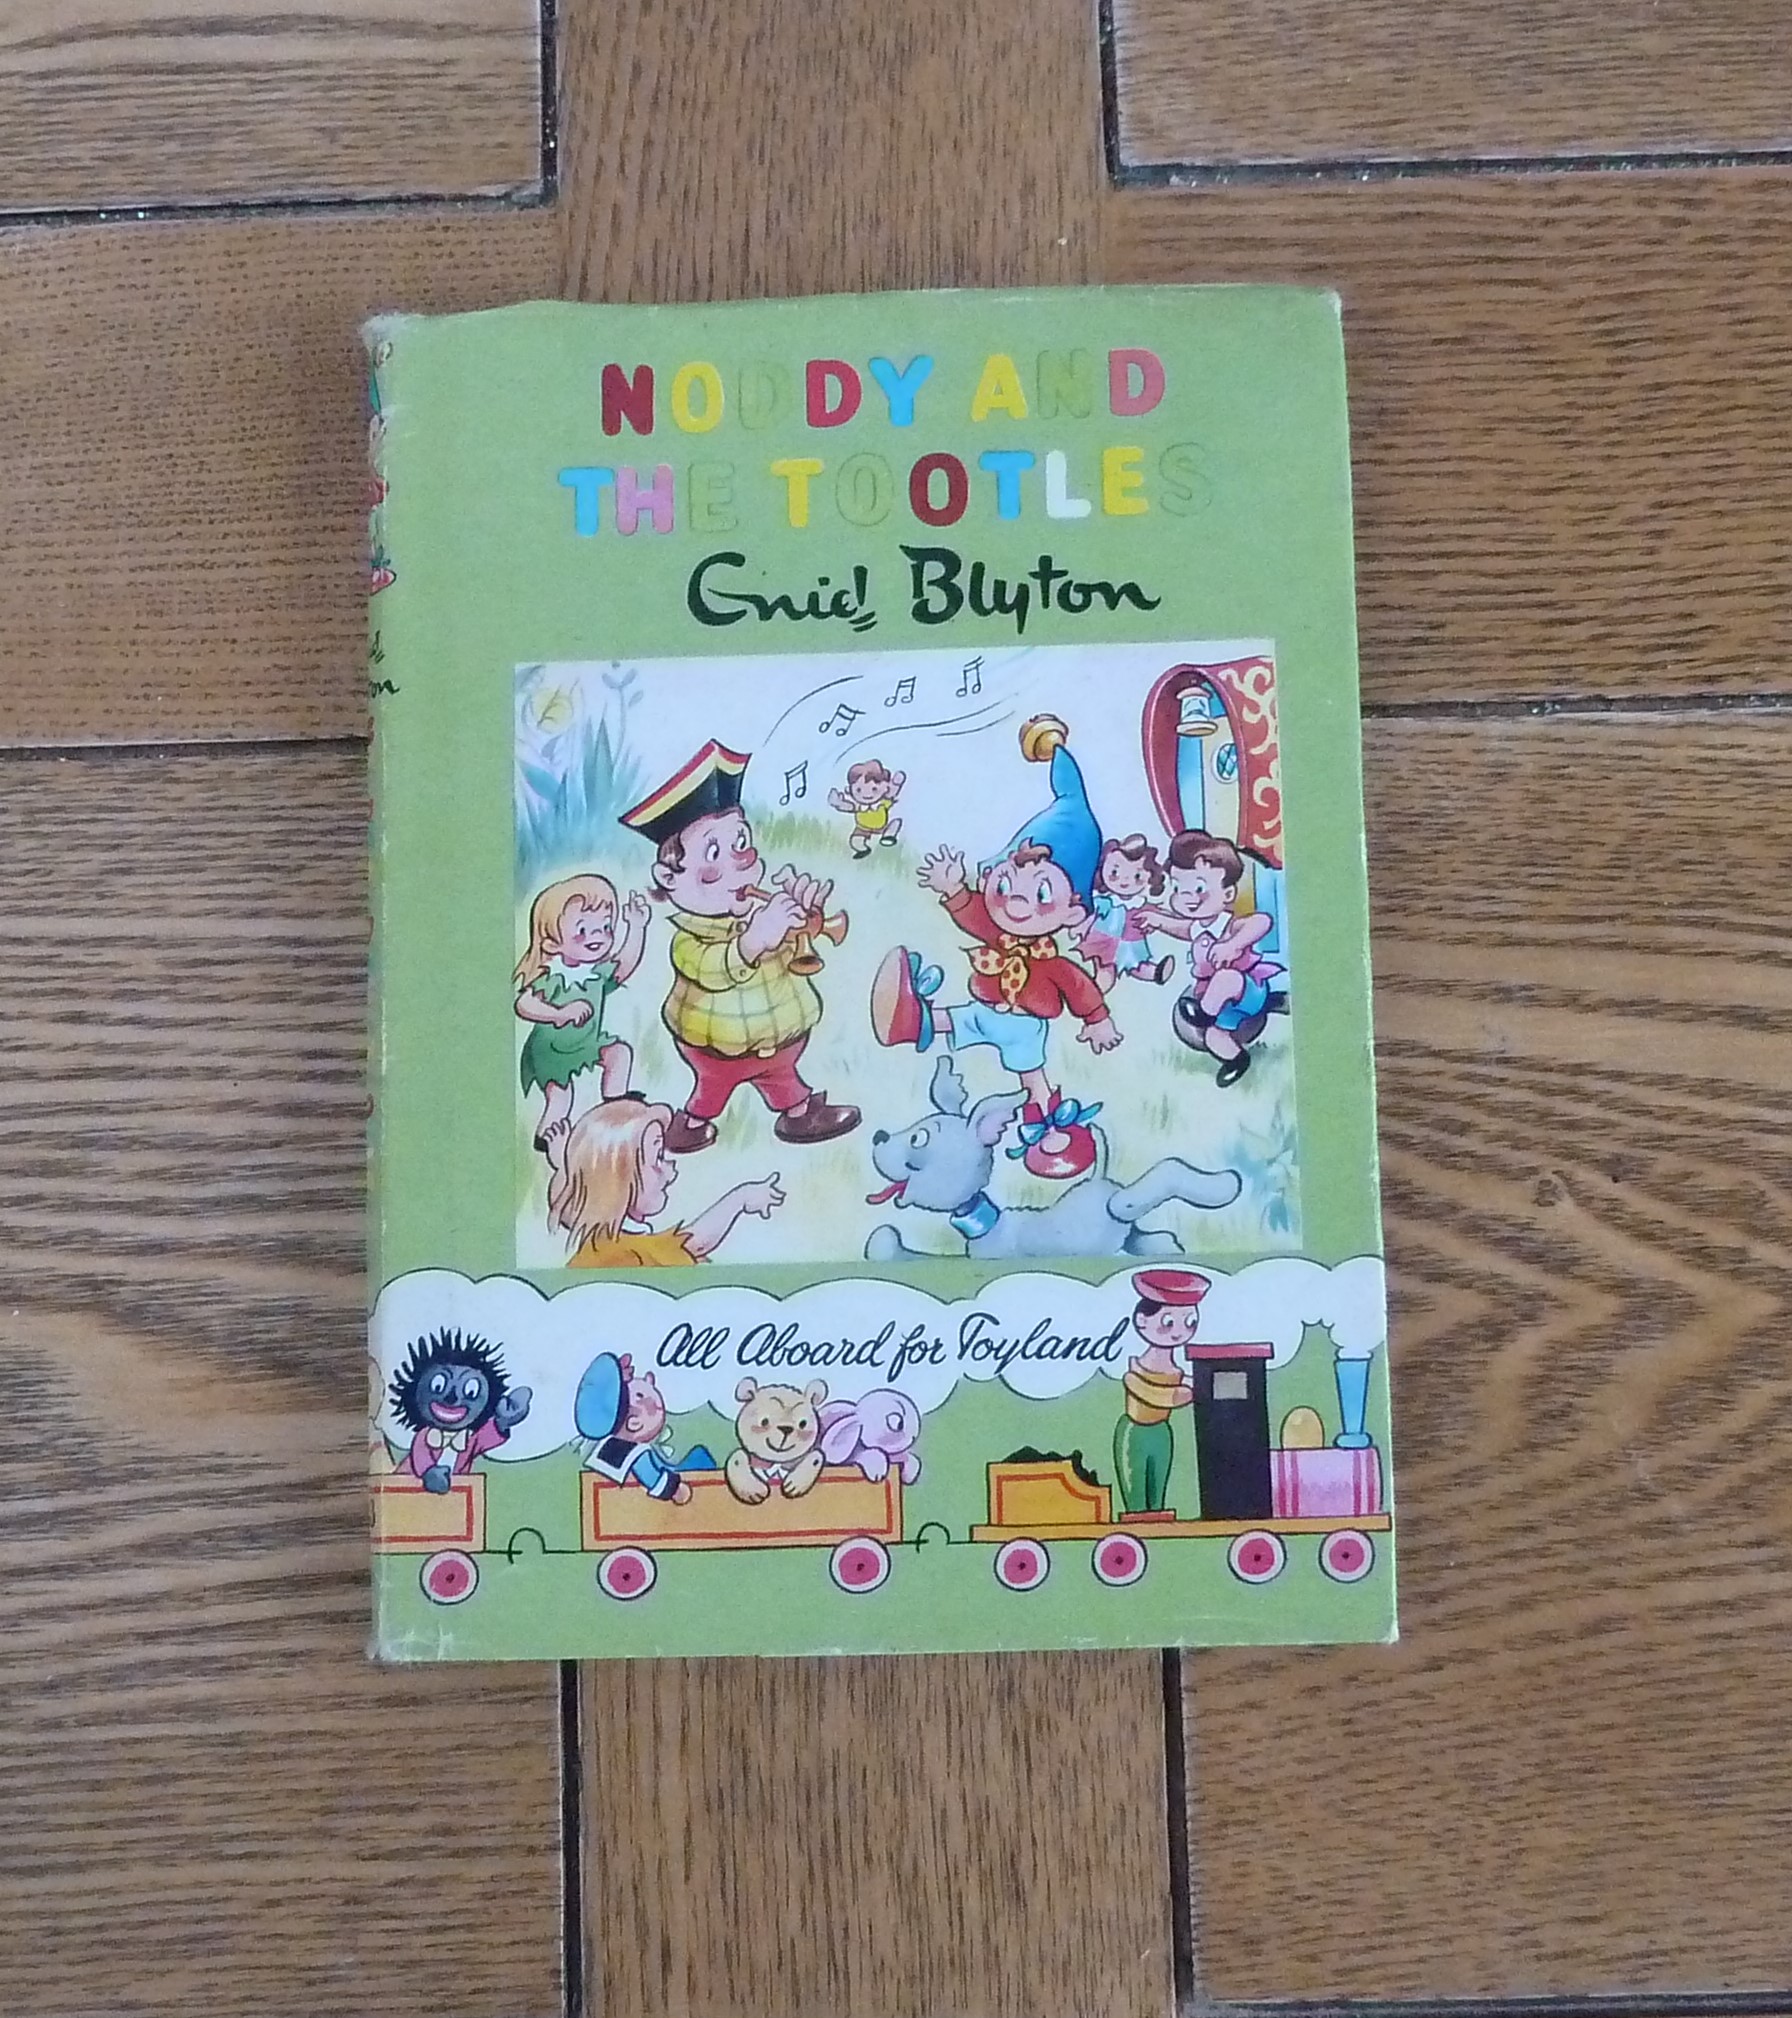 Noddy and Tootles by Enid Blyton